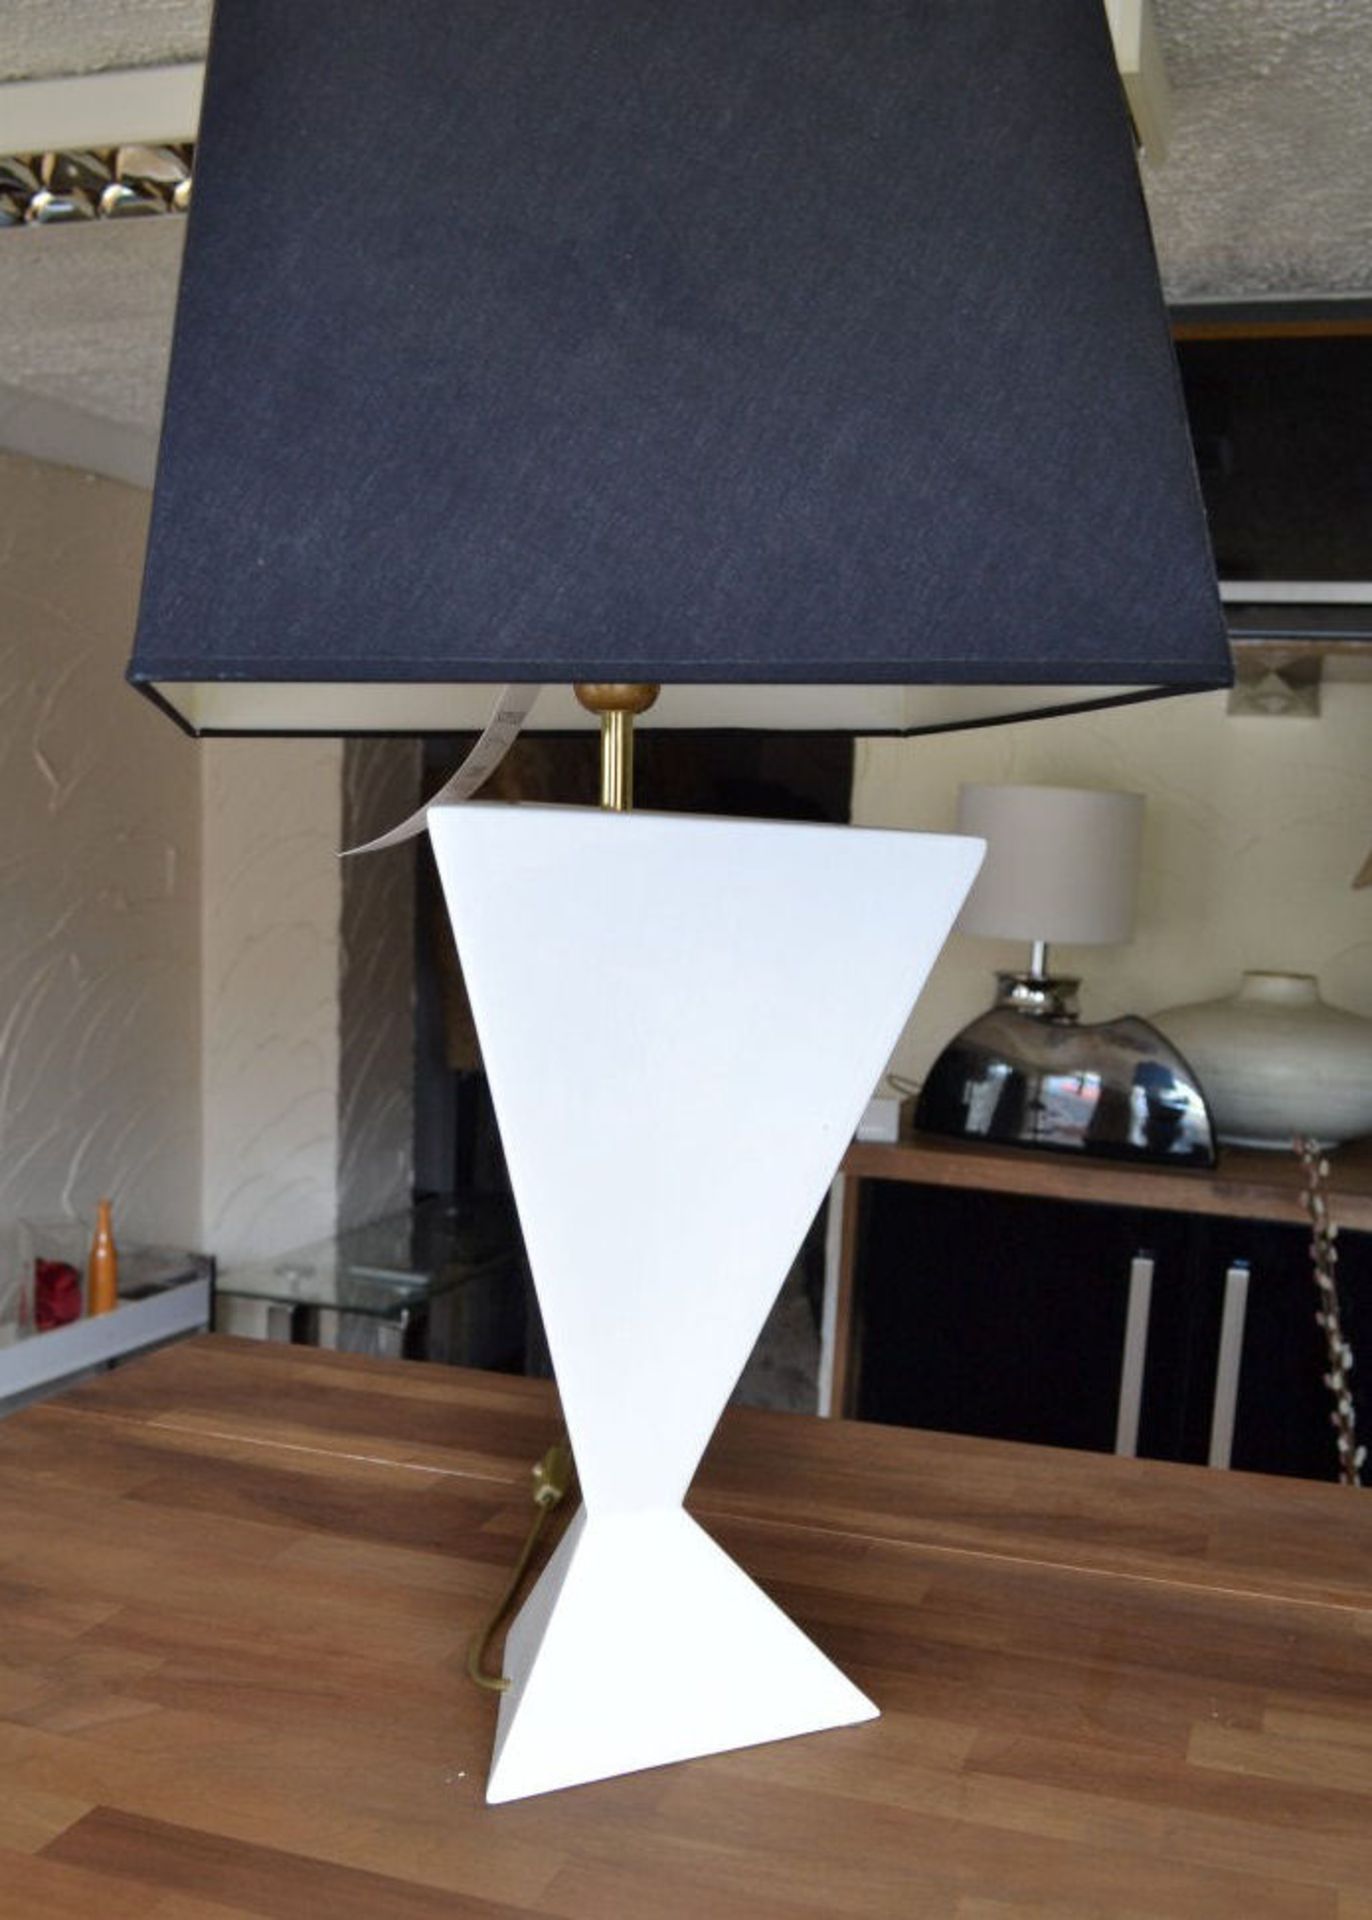 1 x Contemporary White Geometric Table Lamp - Image 3 of 4